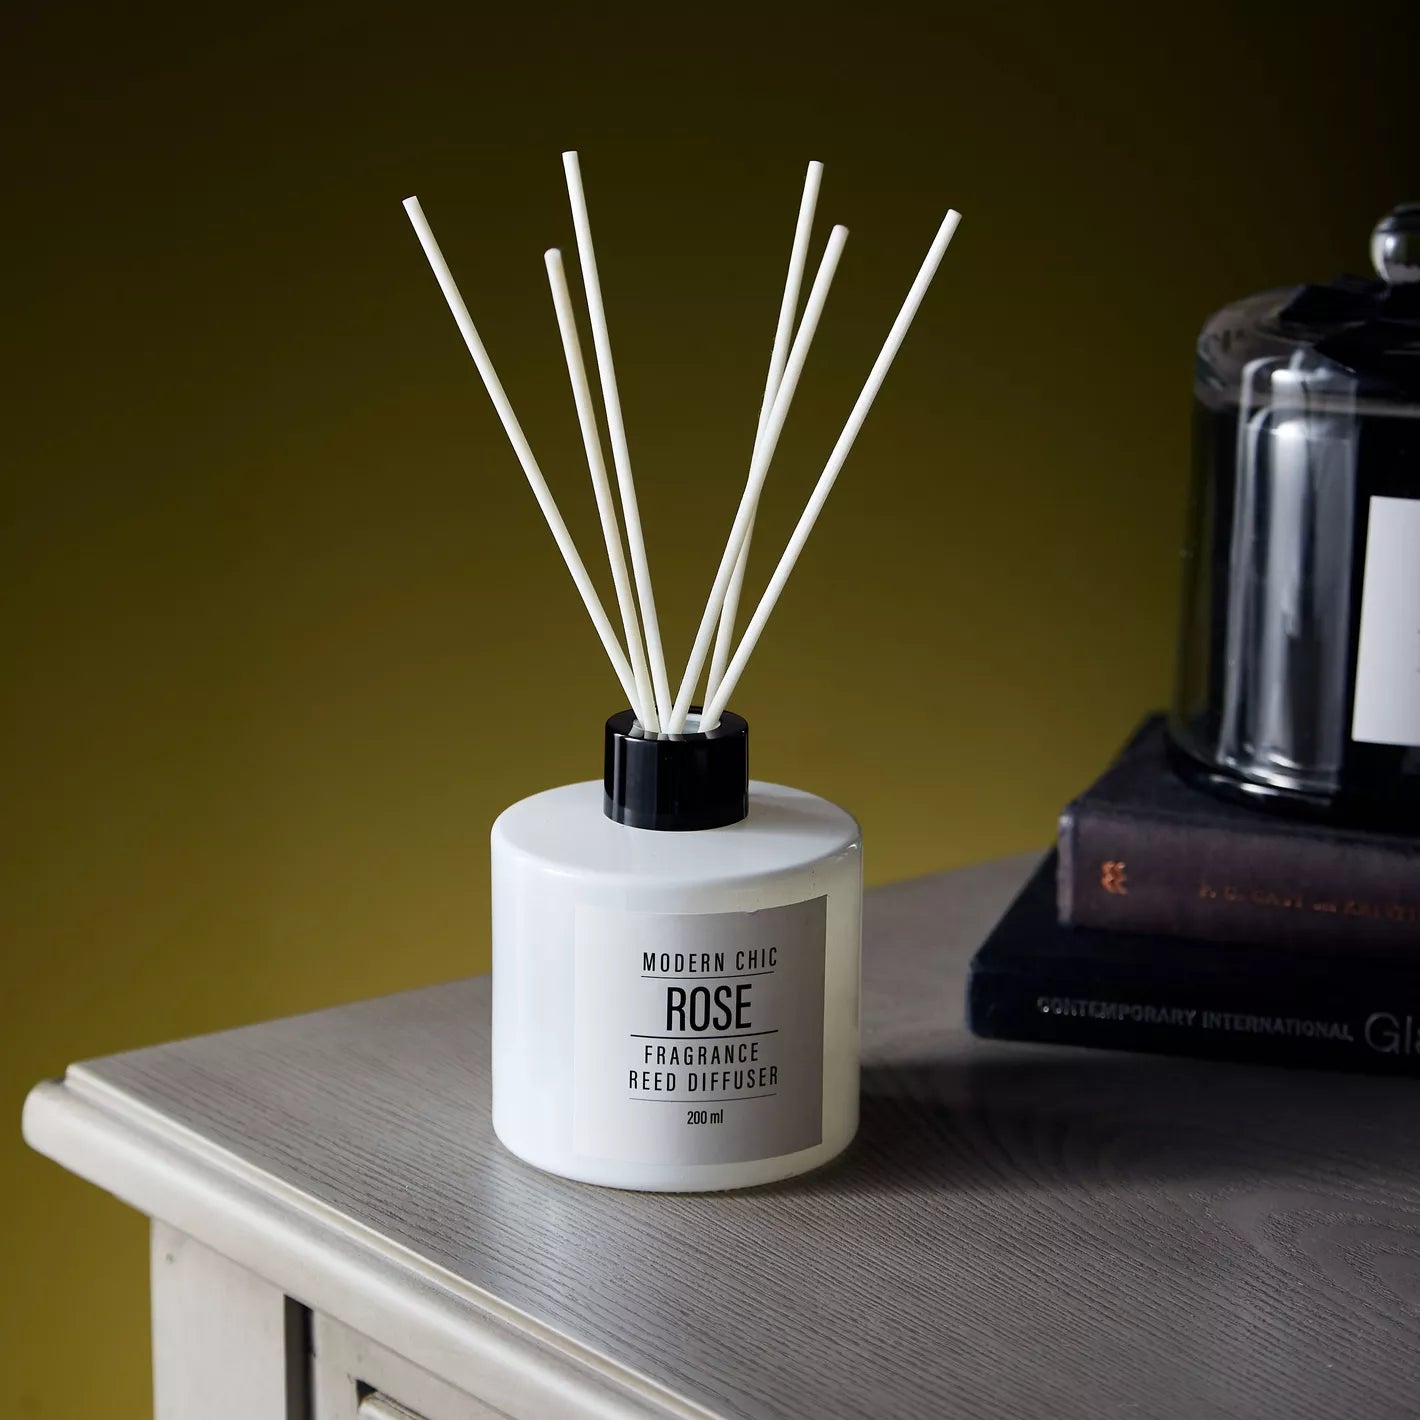 Modern Chic Rose Reed Diffuser - 200 ml